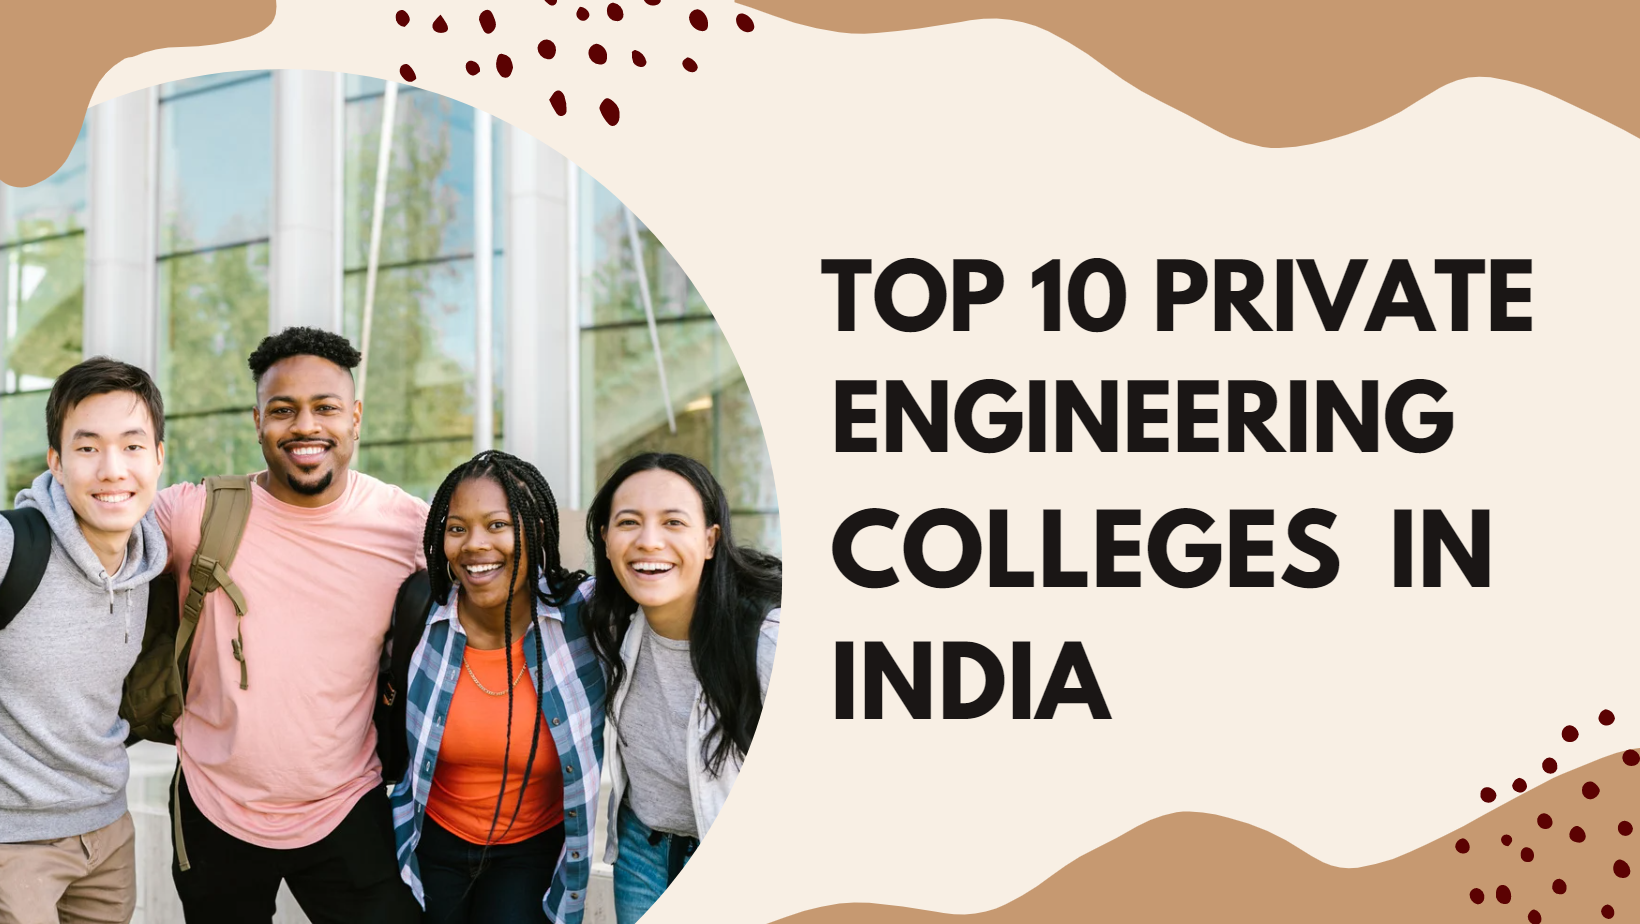 Top 10 Private Engineering Colleges in India